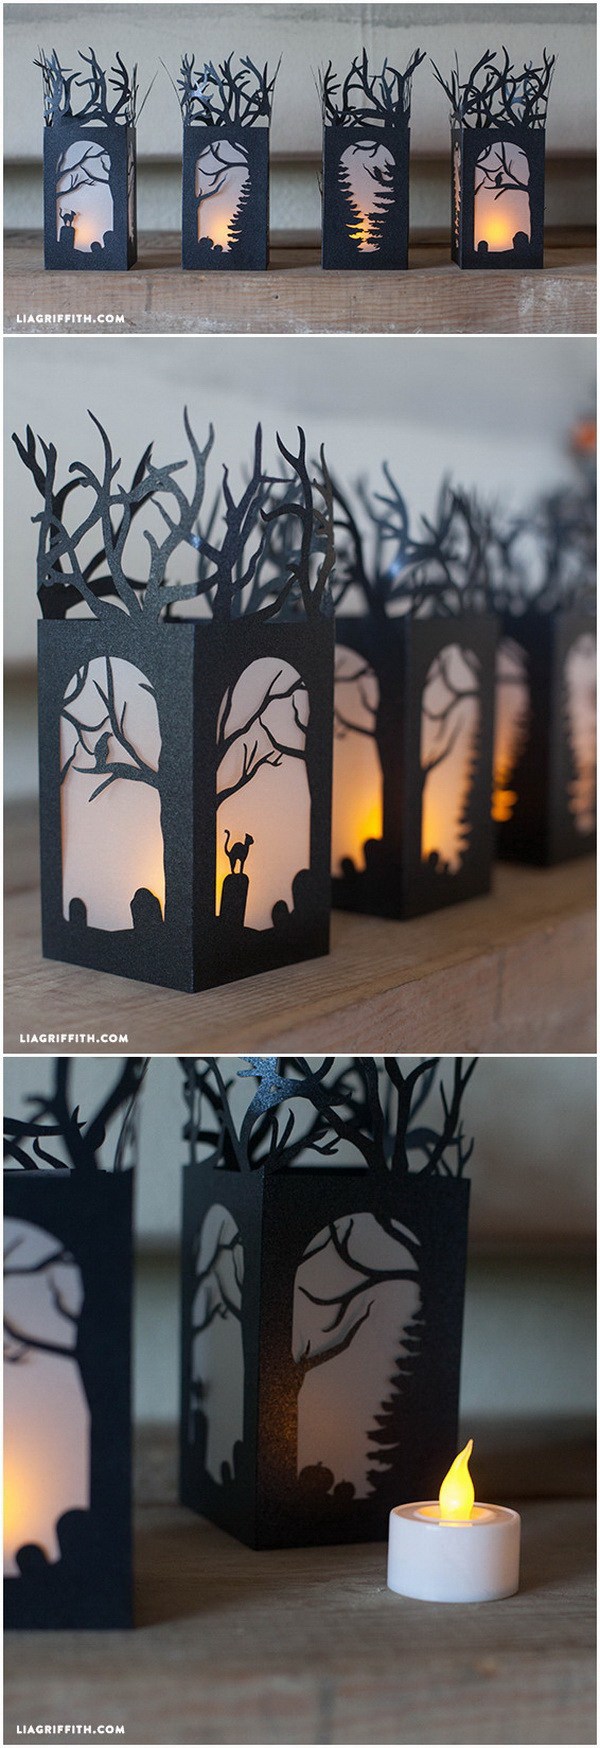 20+ Easy to Make Halloween Decorations - Hative